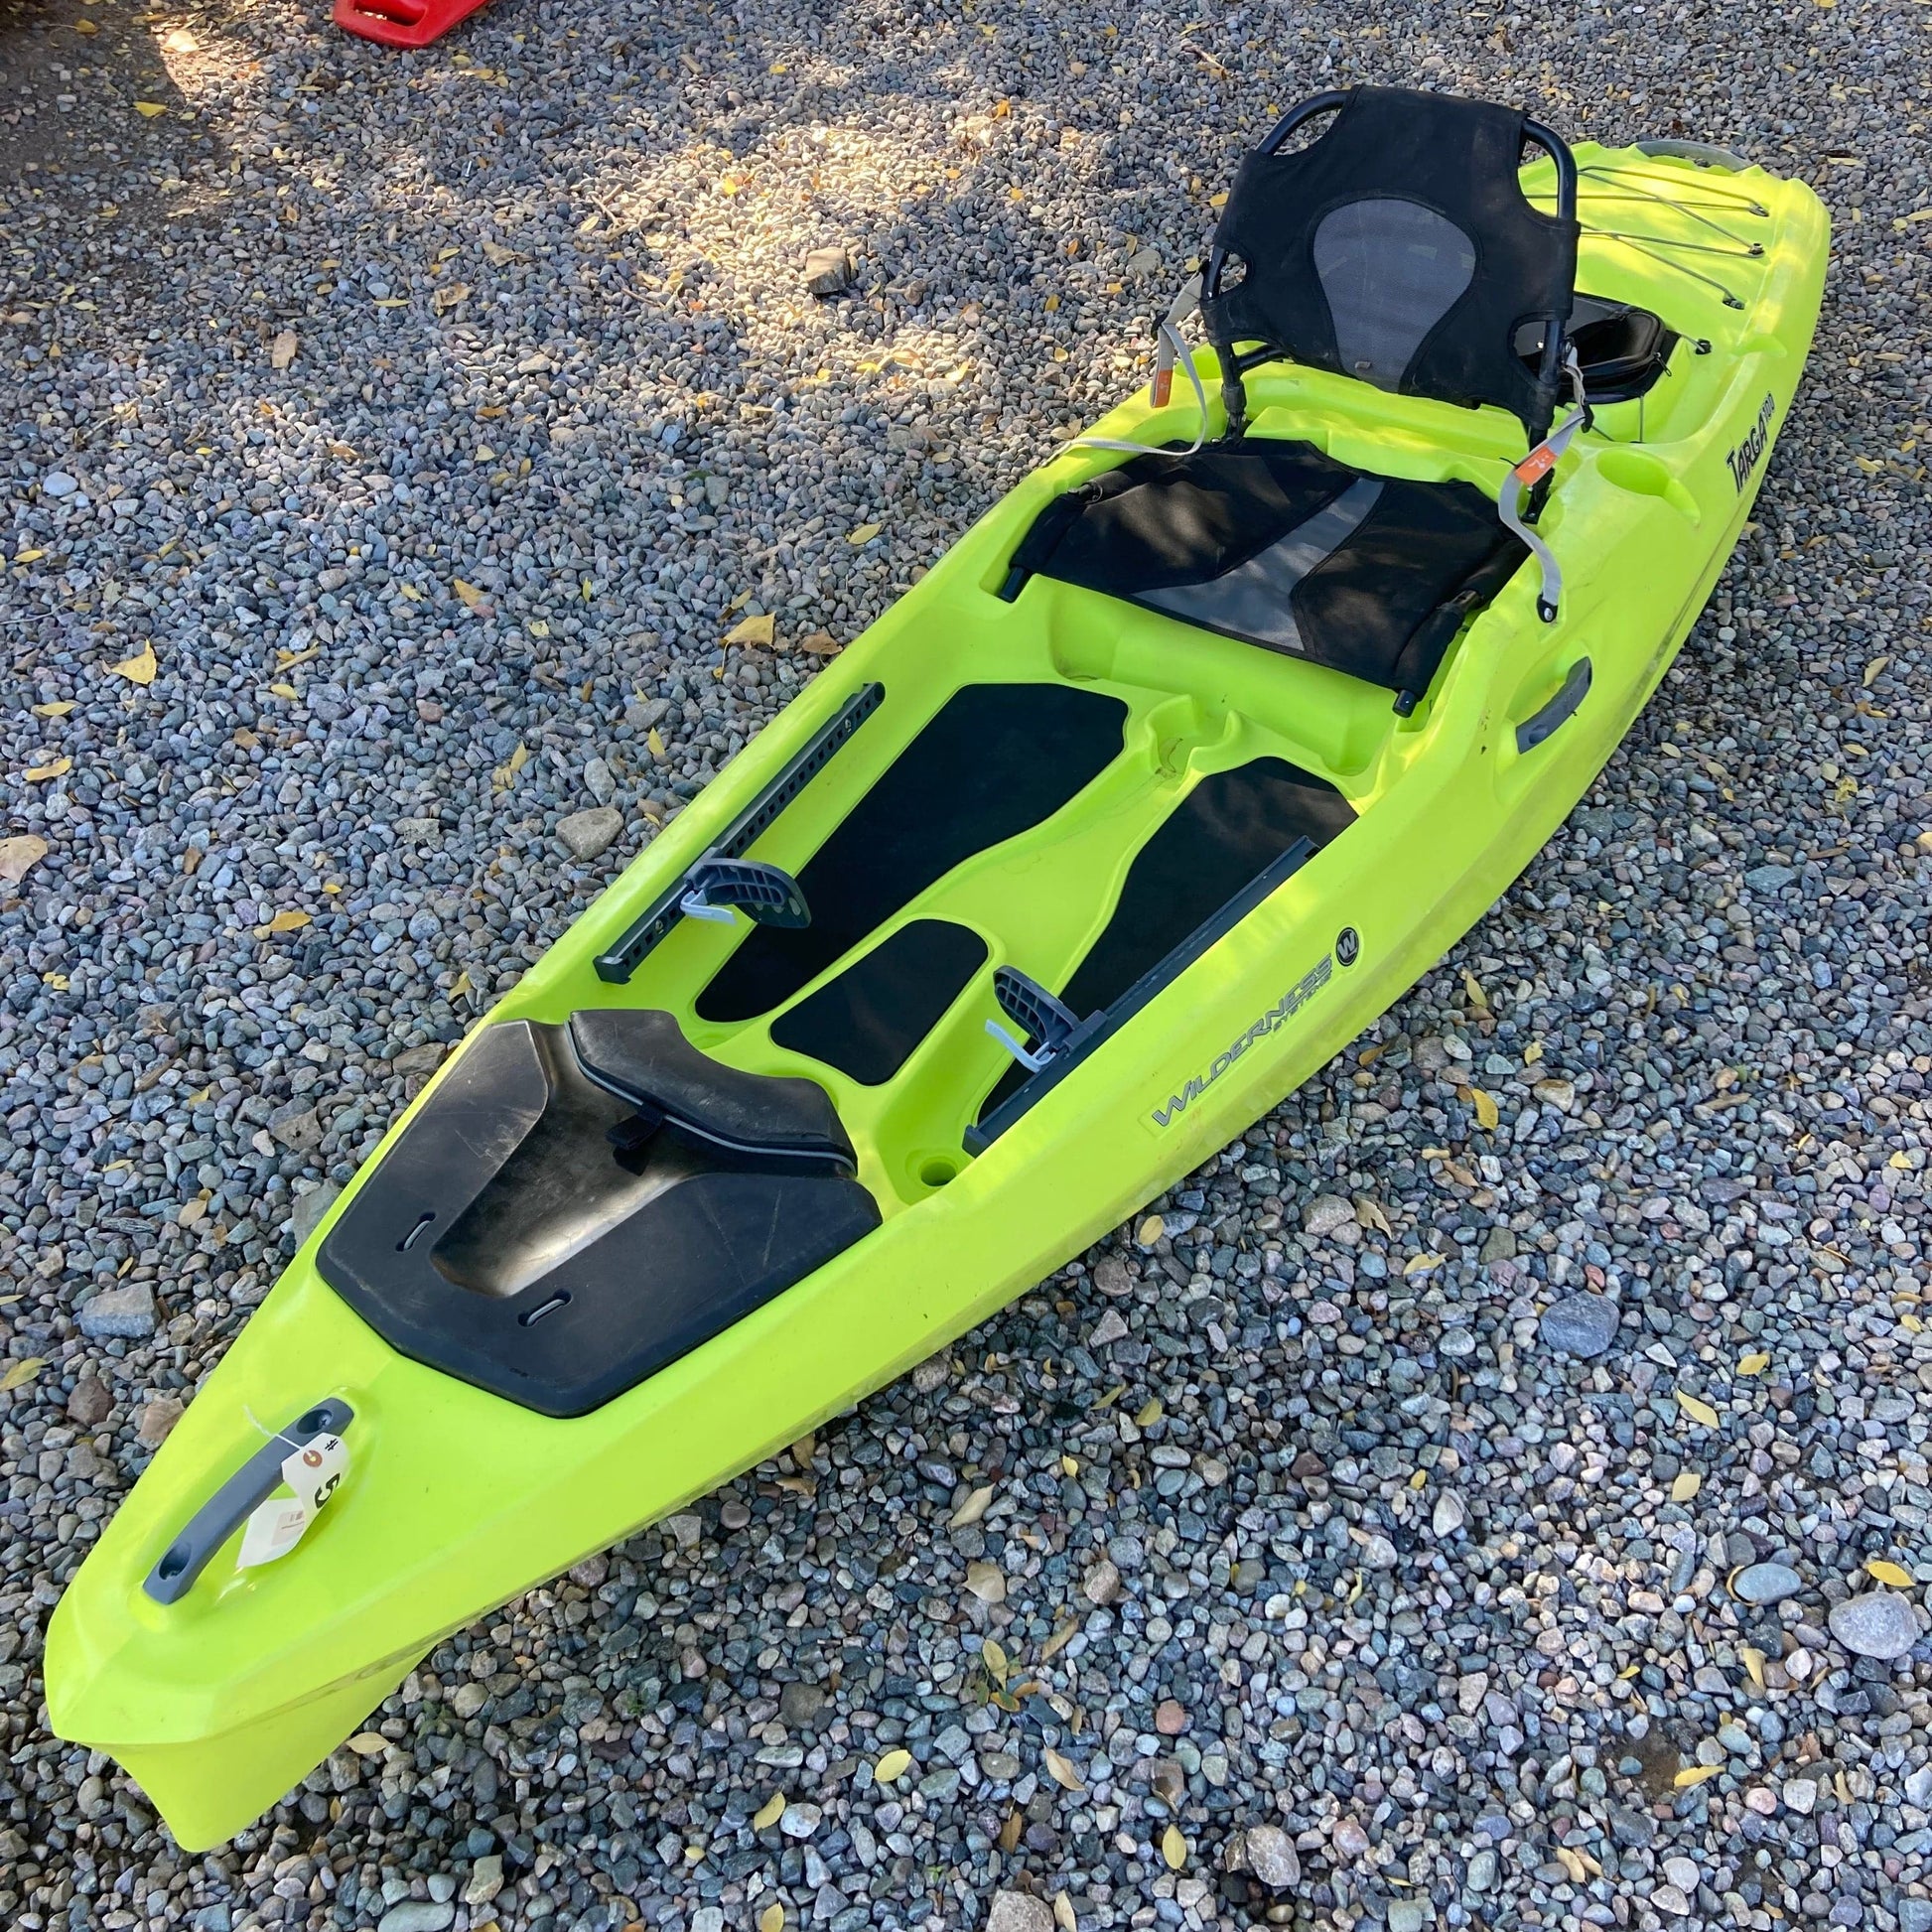 Featuring the Used Targa 10 used fishing kayak, used touring / rec kayak manufactured by Wilderness Systems shown here from a third angle.